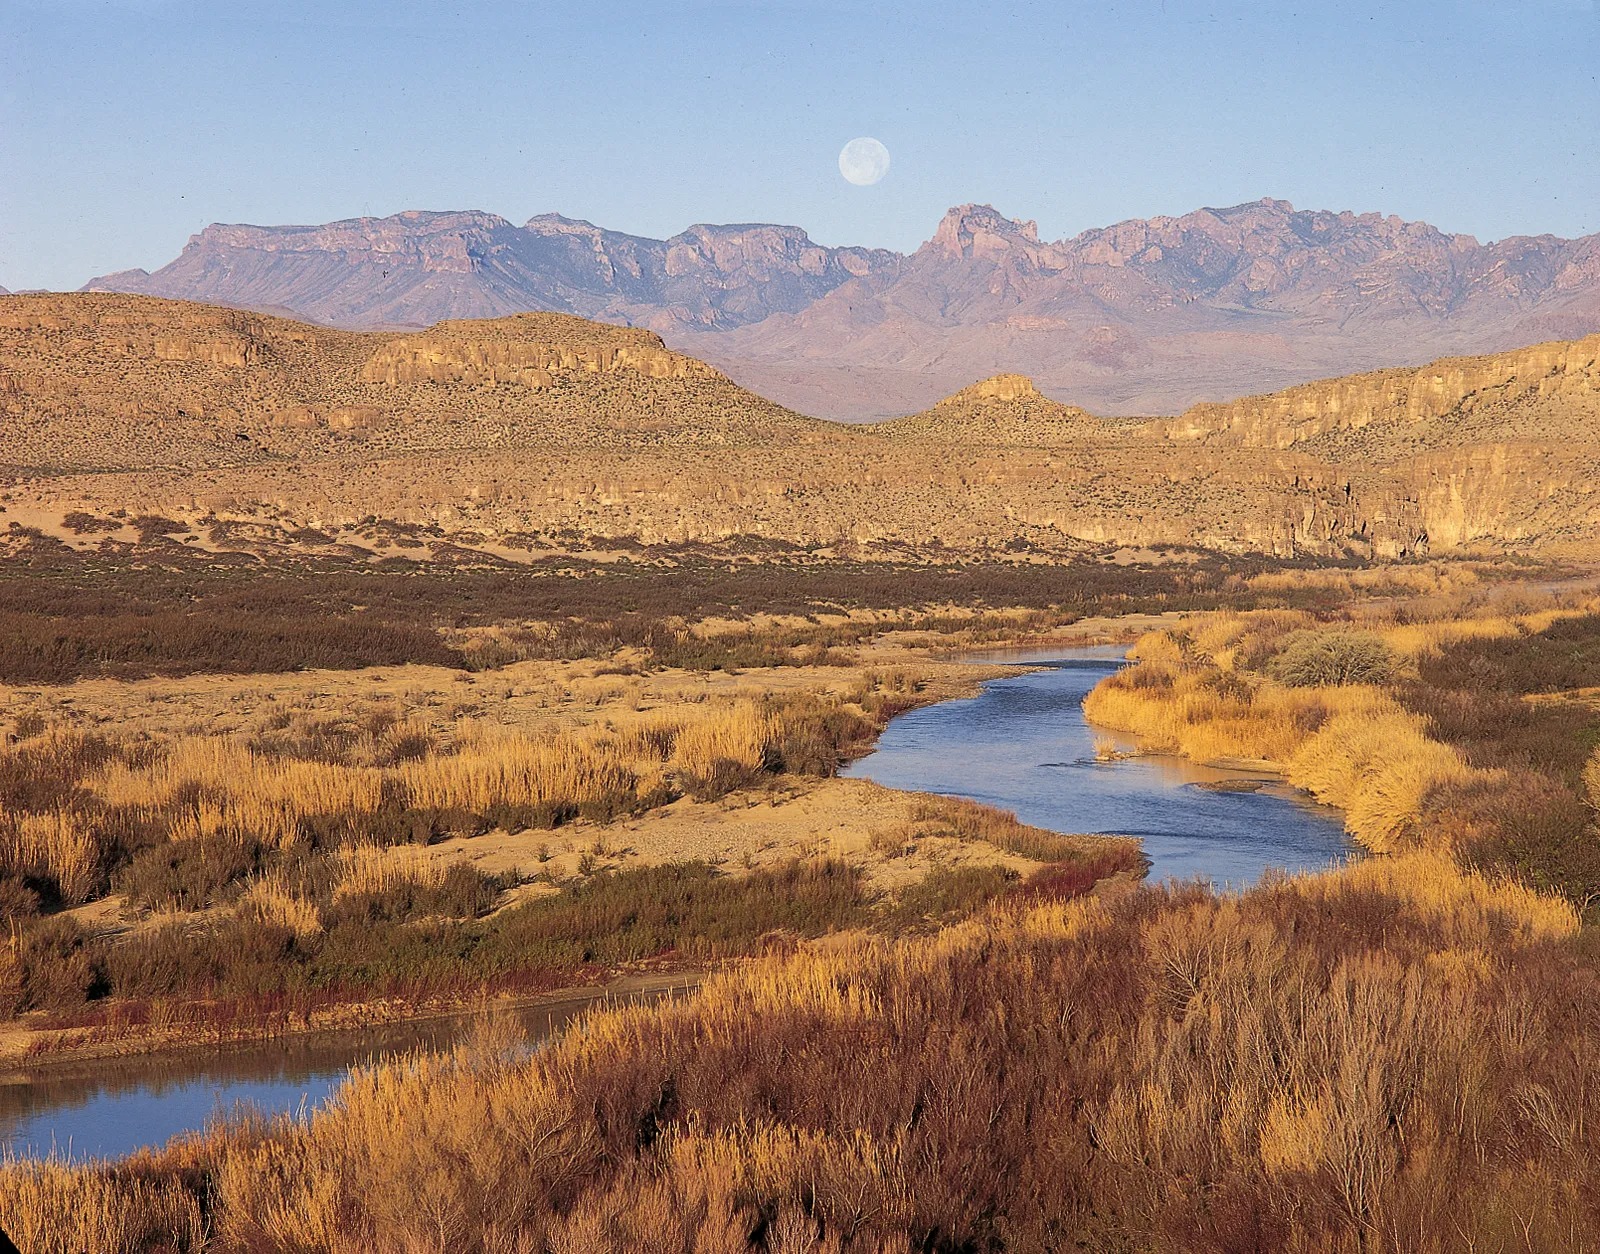 It's Time to Take Geography Test — Can You Get 18 on This Around World Quiz? Rio Grande